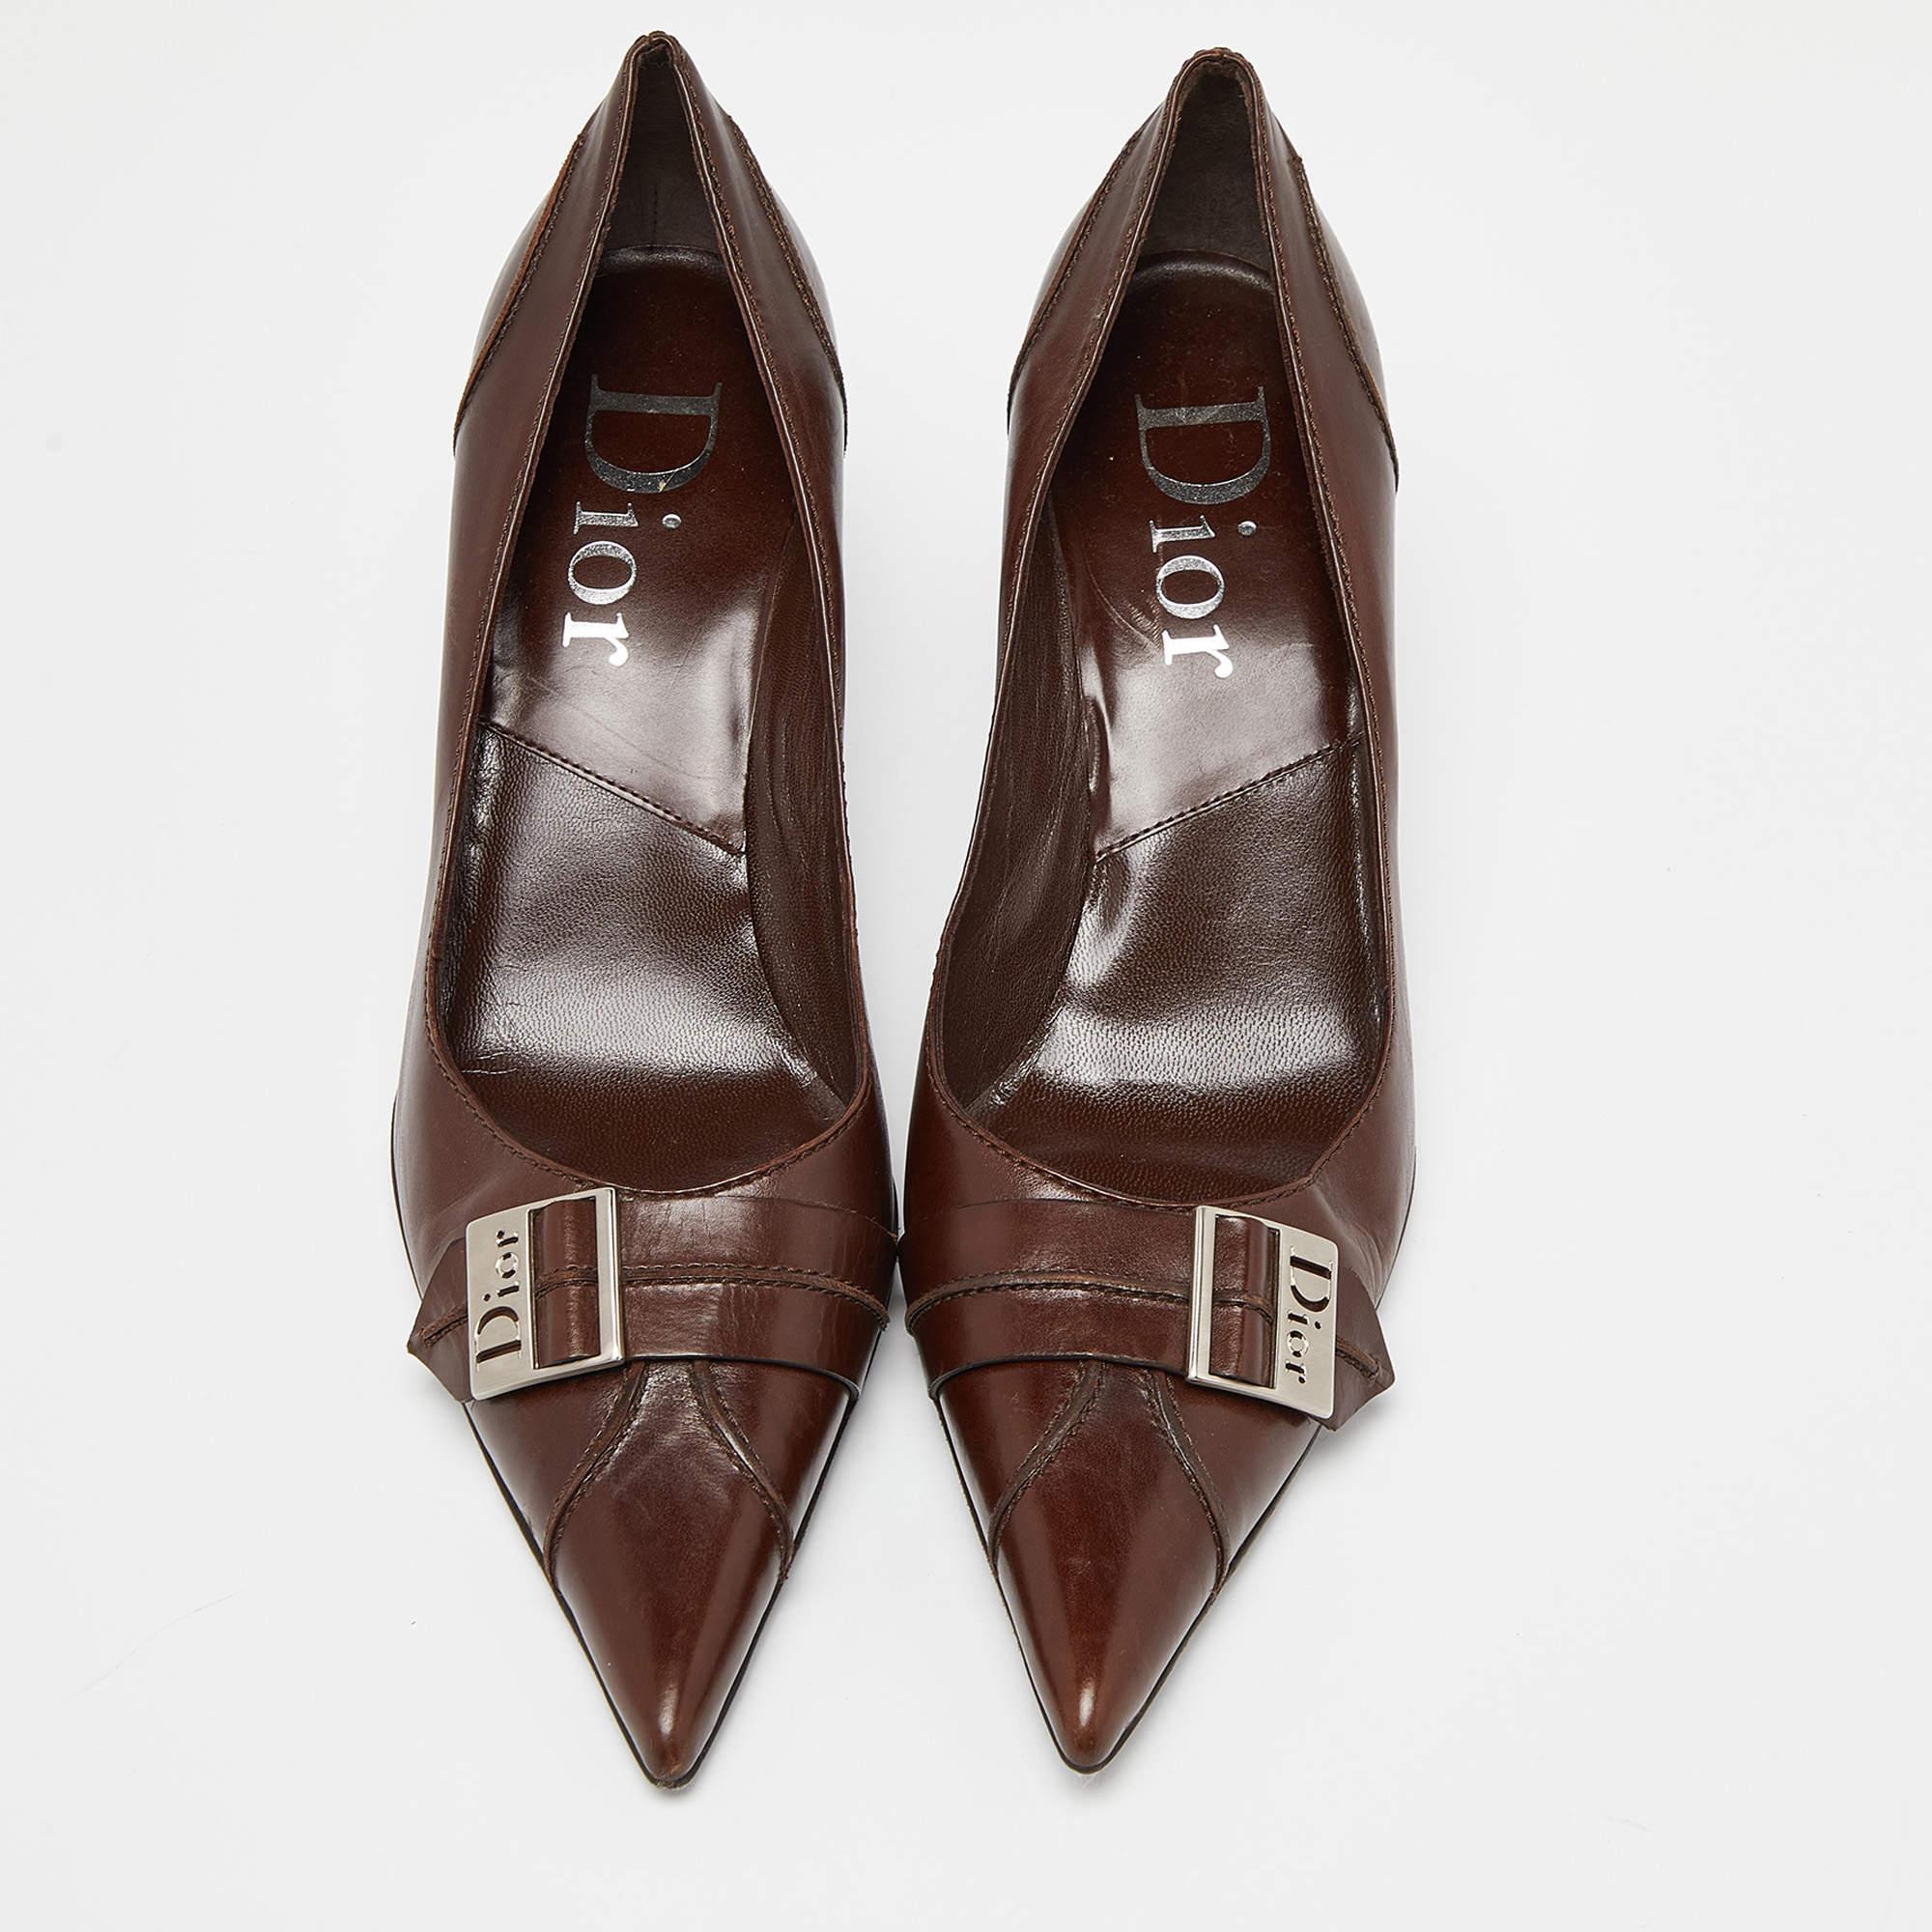 These Dior 'Cherie' pumps are designed in iridescent brown-hued suede with 8cm high heels and pointed toes. They make a perfect partner to trousers or pantsuits as the shade beautifully peeps out of the hemline. Carry a matching clutch to complete